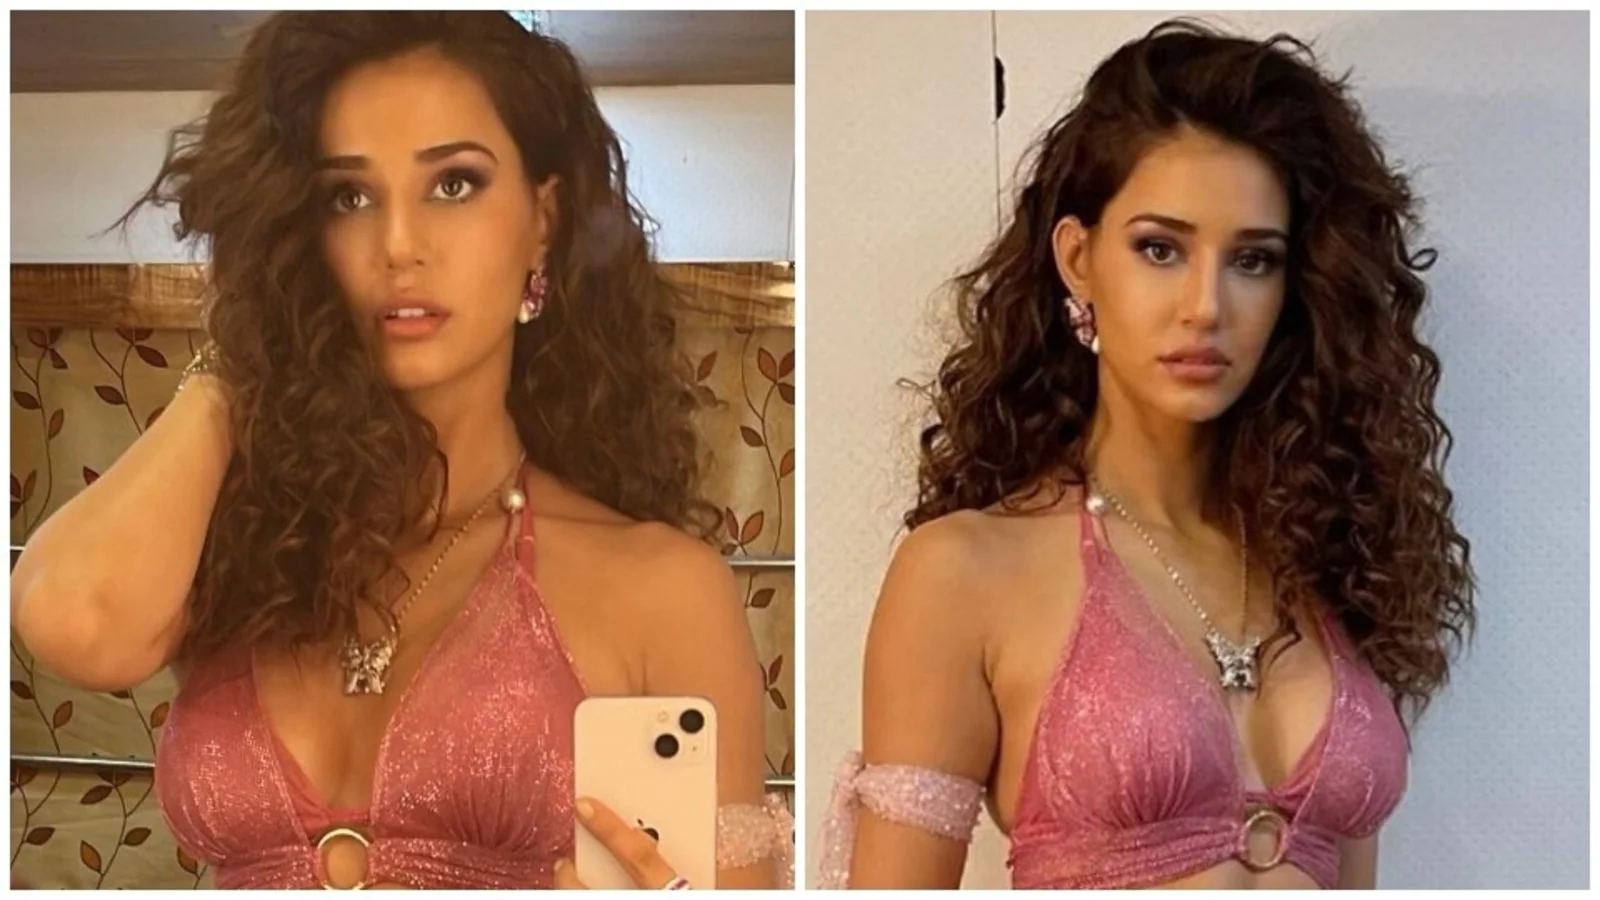 Disha Patani in pink bralette and see-through pants looks glam, Krishna Shroff says ‘Servin looks’: Check out pics